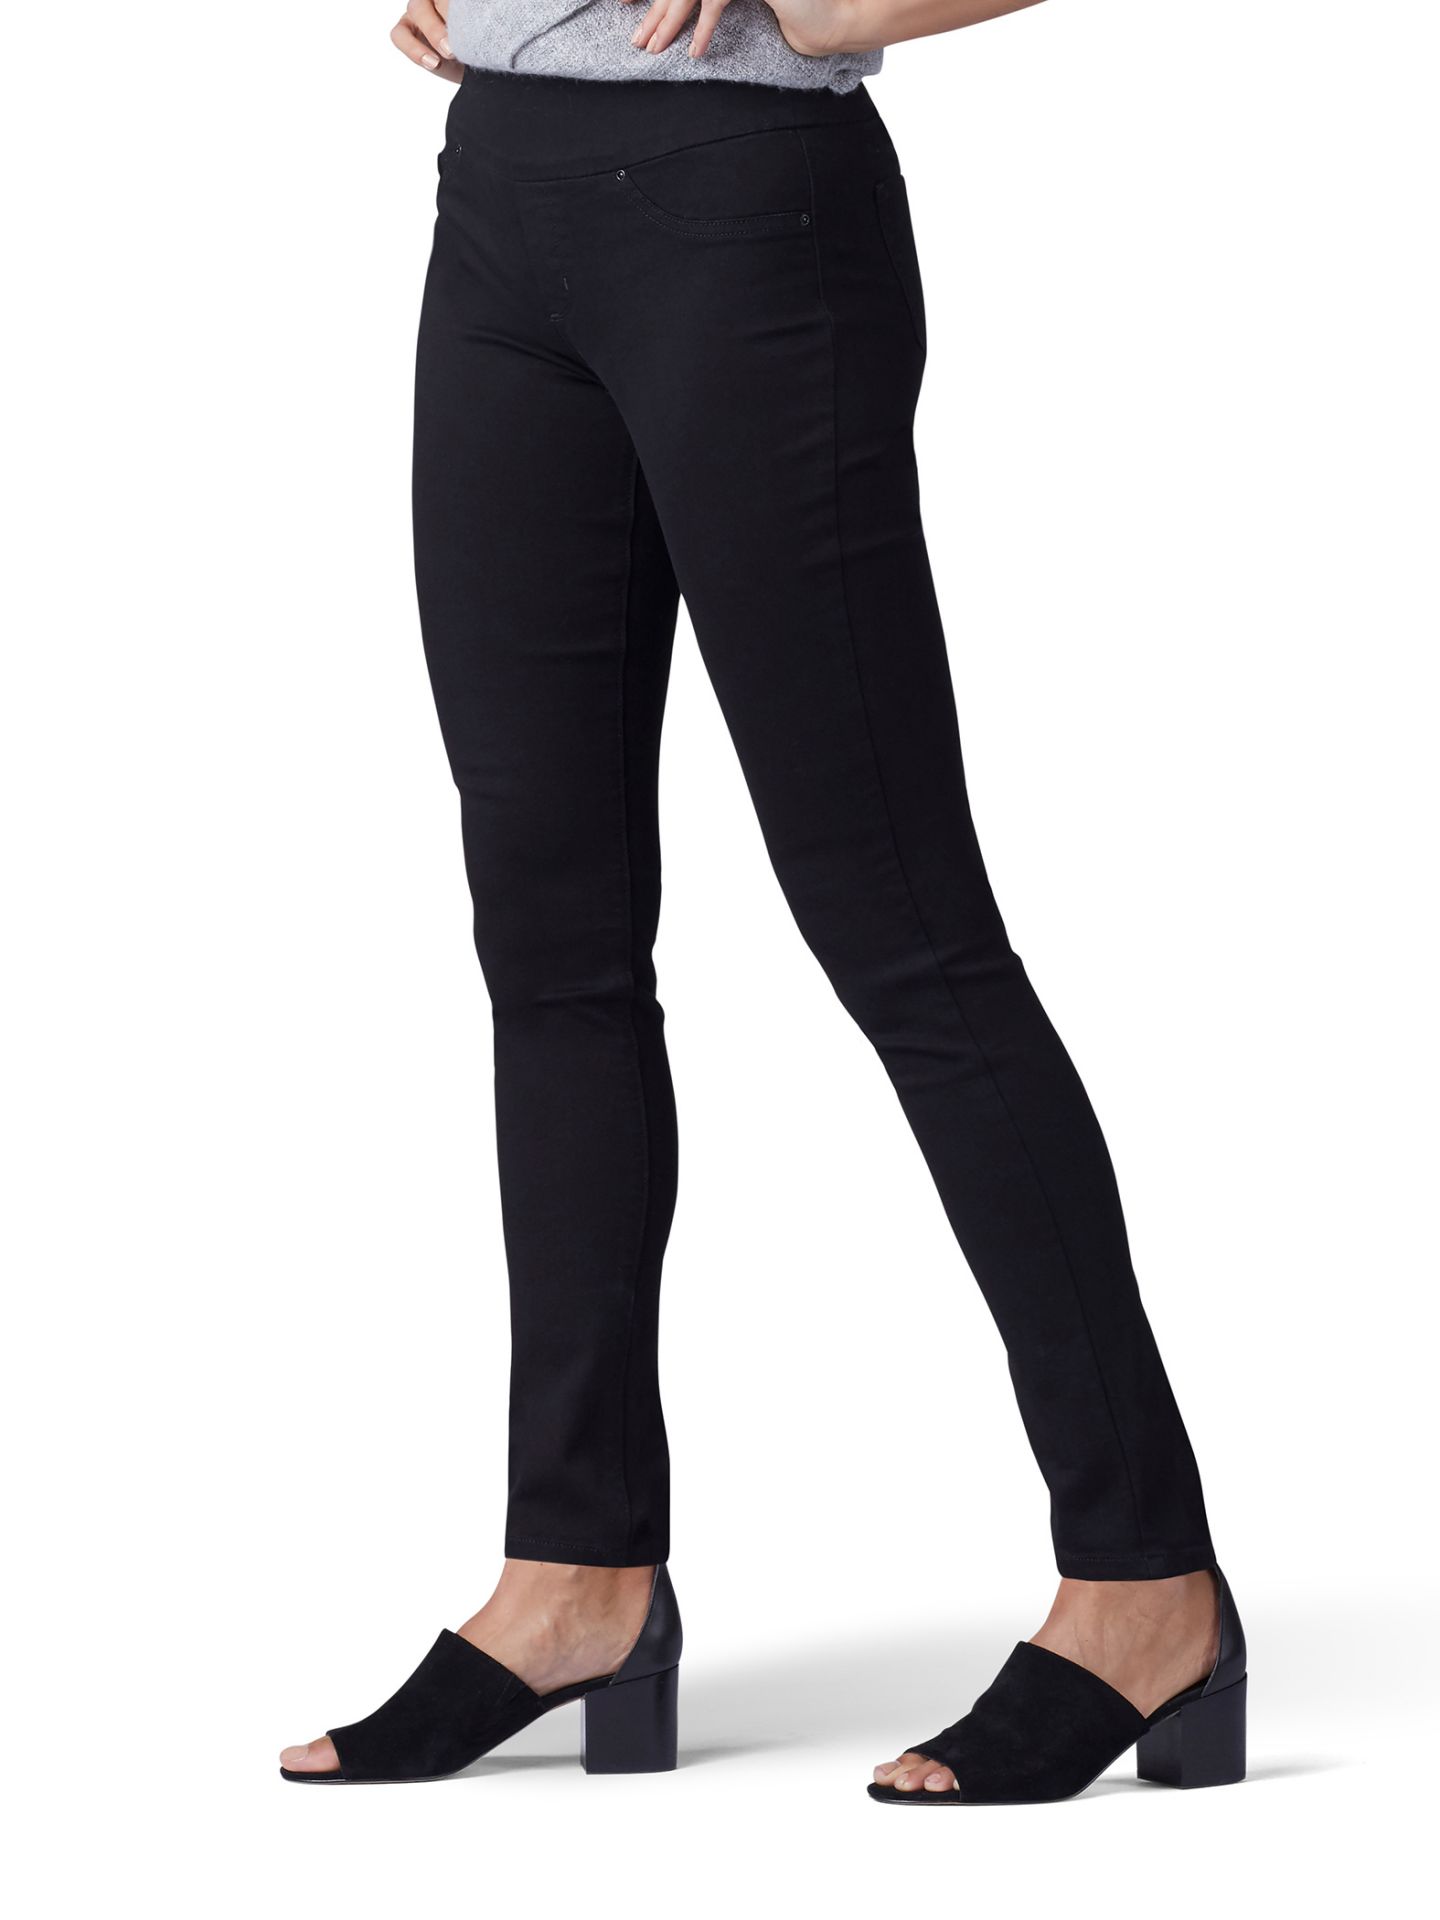 Lee sculpting mid rise slim fit pull-on skimmer pants NWT womens